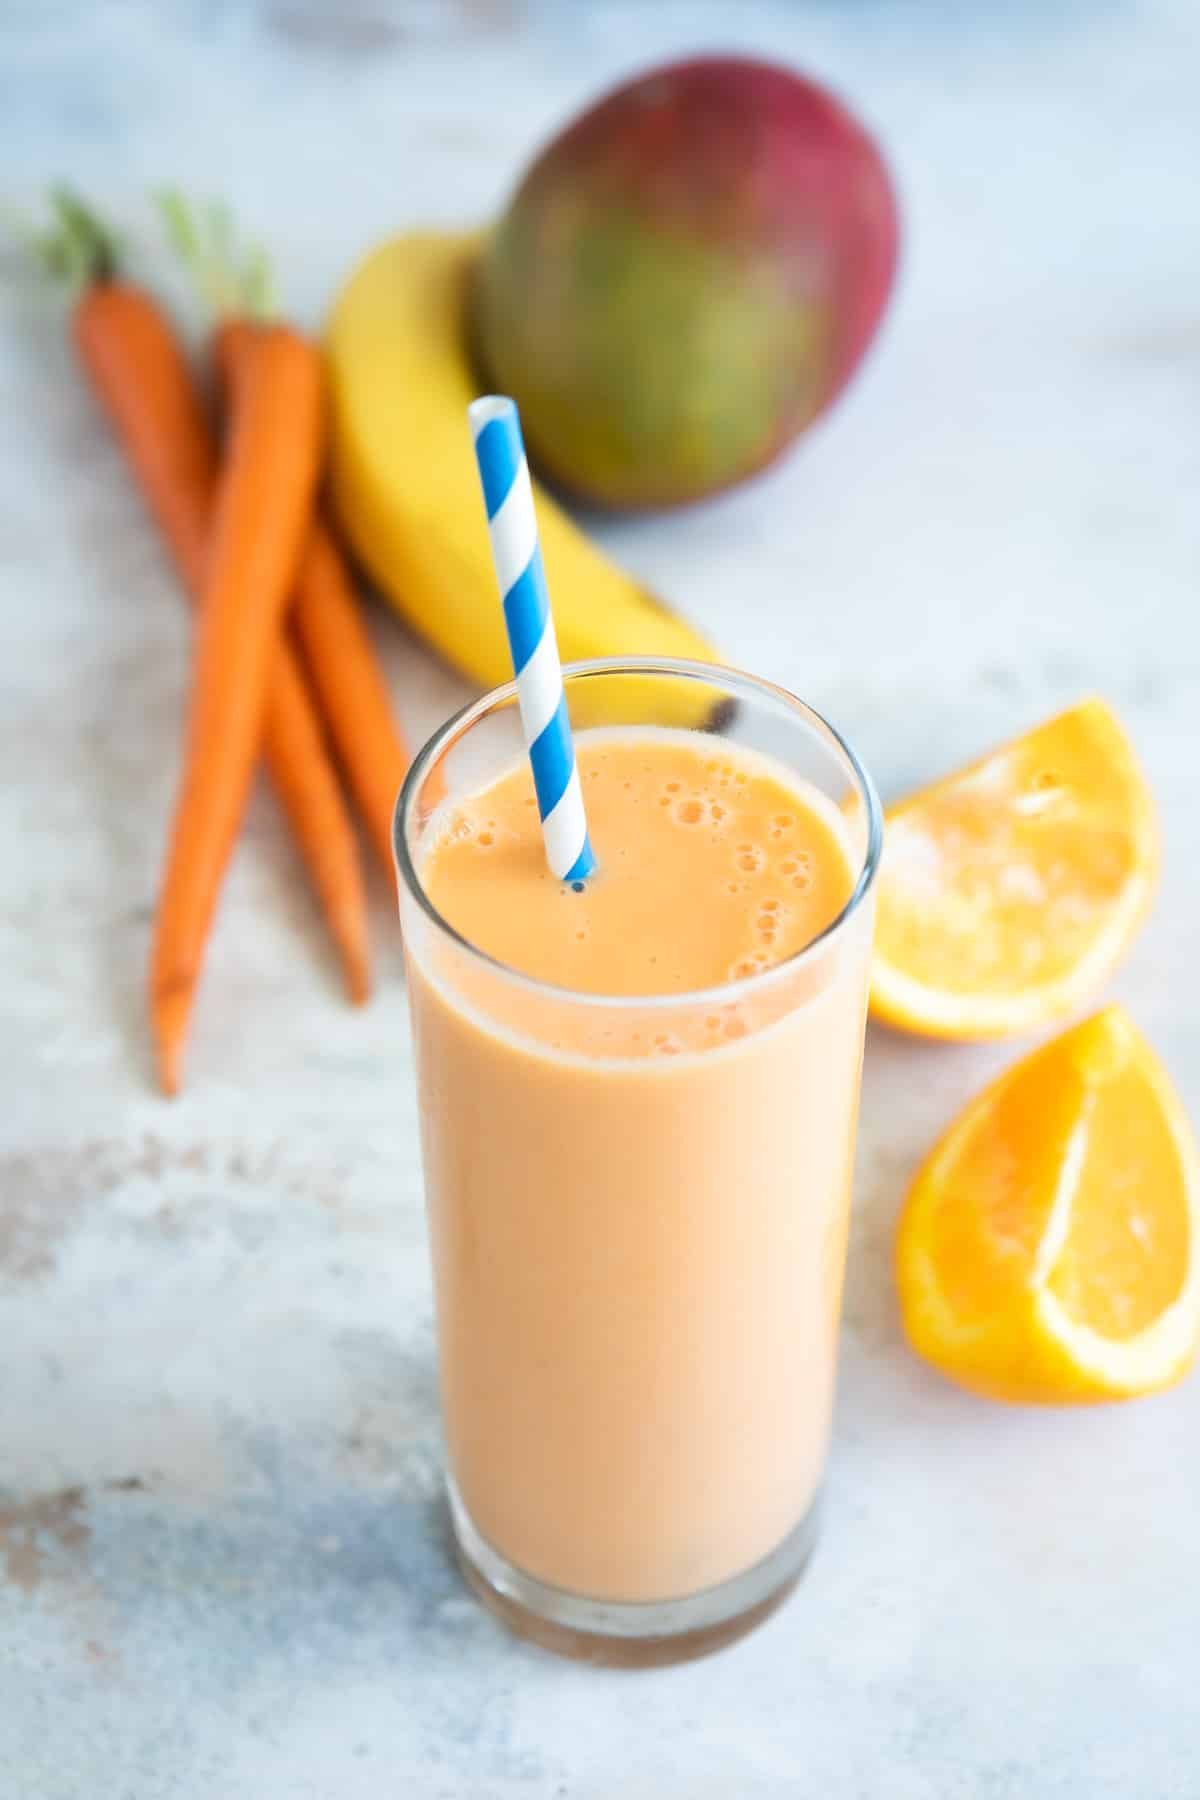 A glass of carrot smoothie next to a mango, carrots, and a banana.